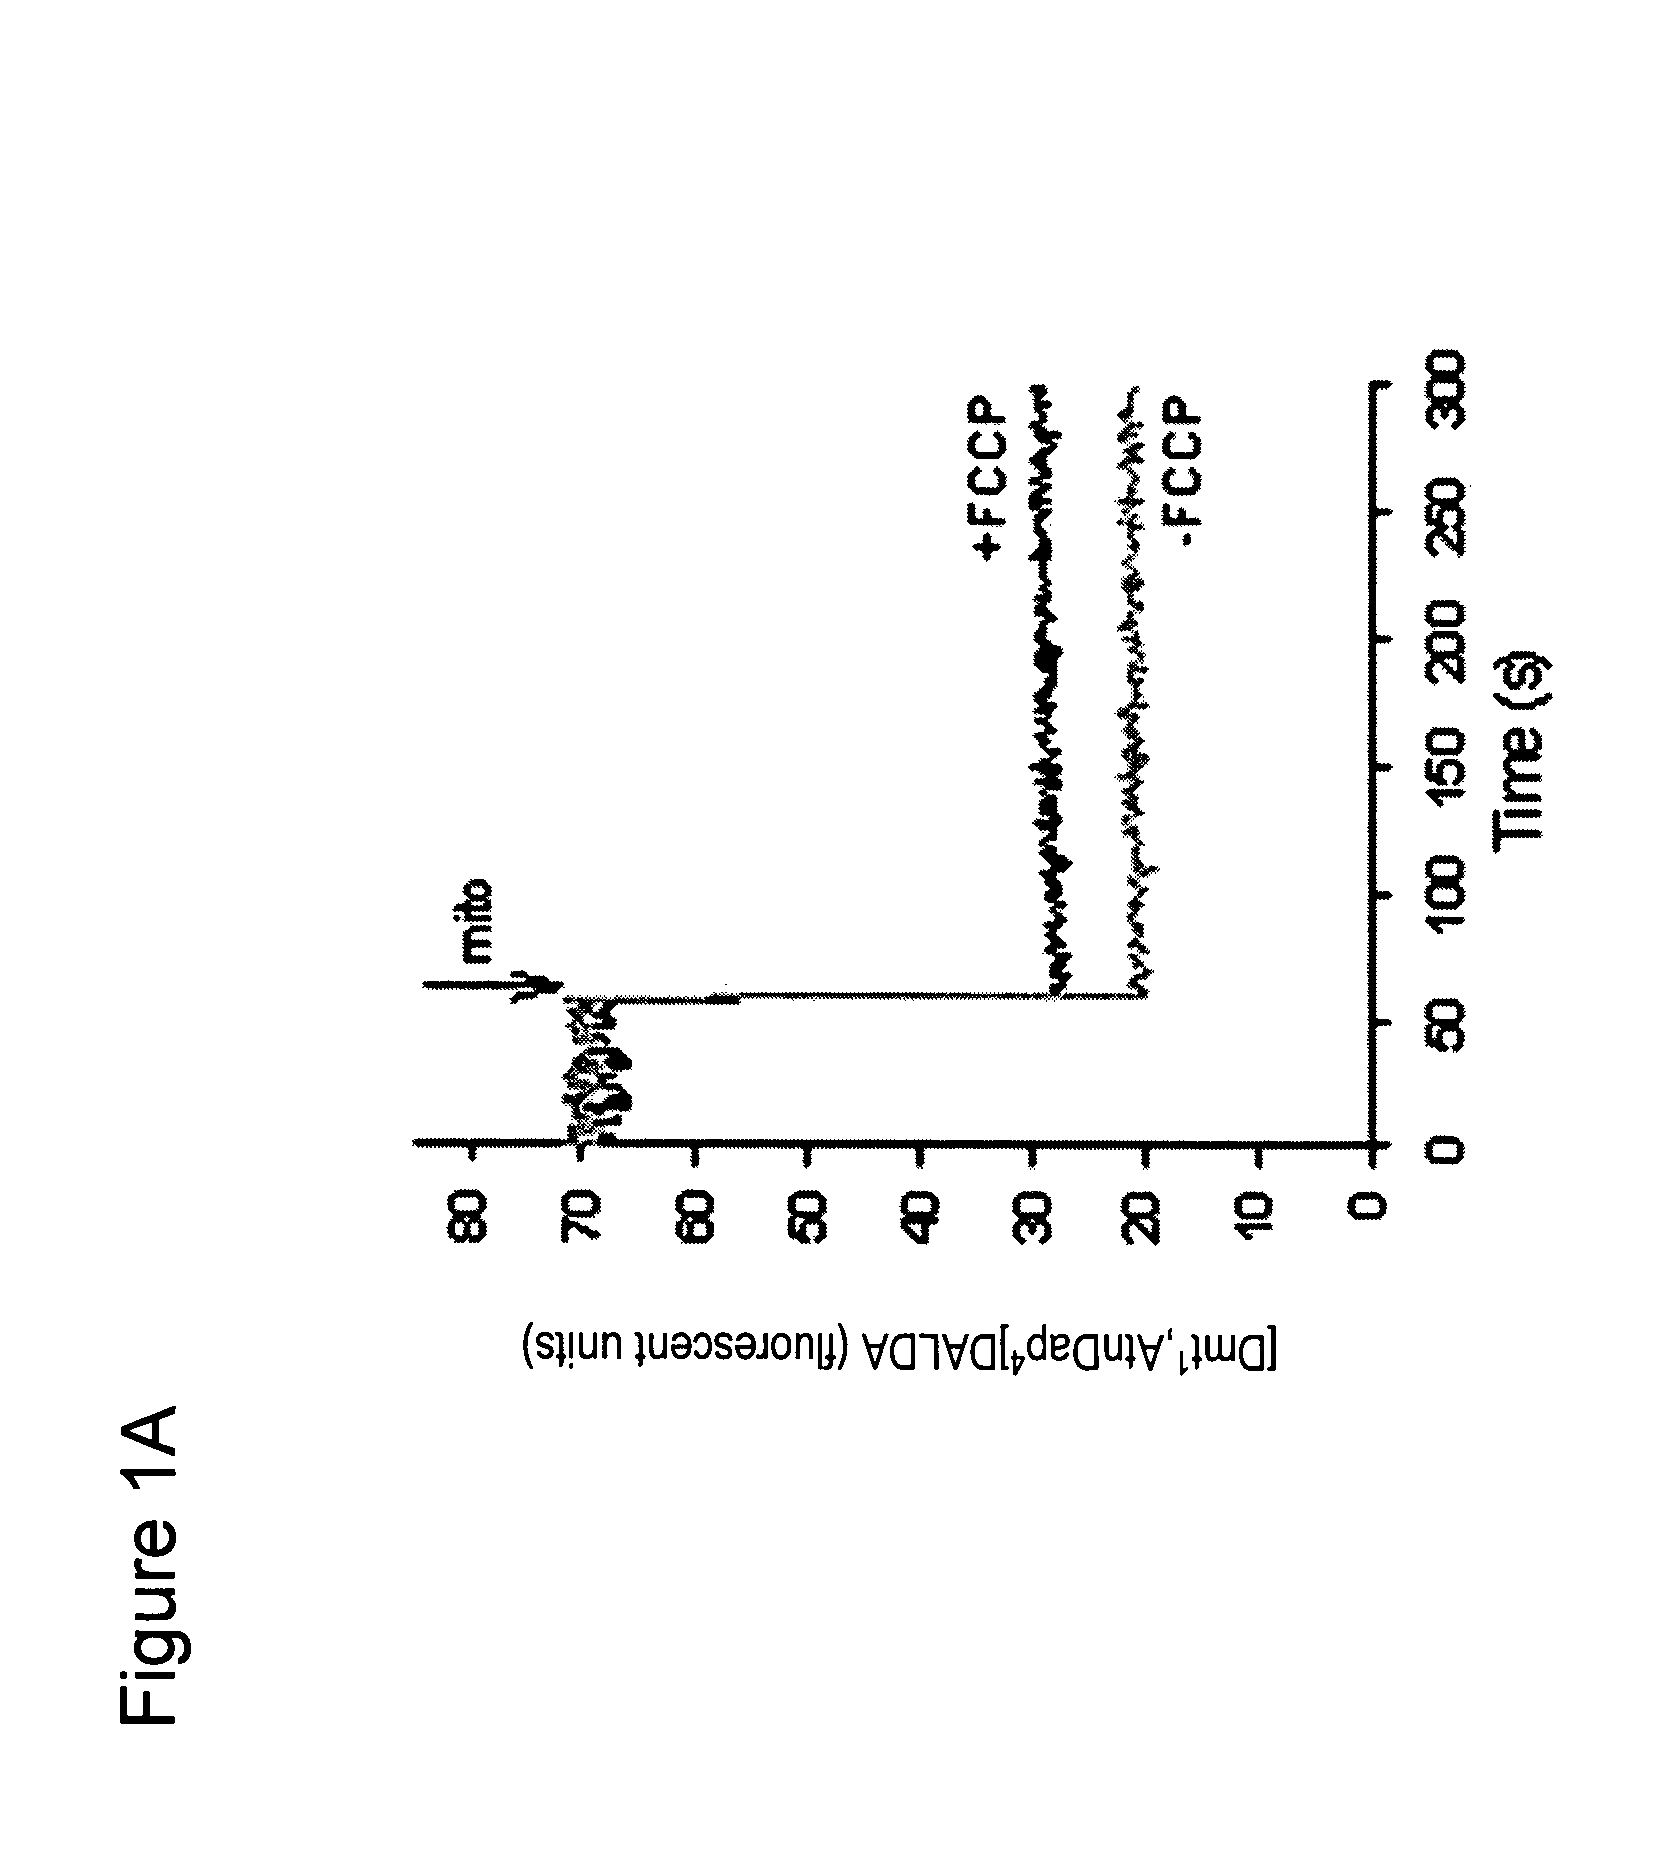 Methods for preventing mitochondrial permeability transition